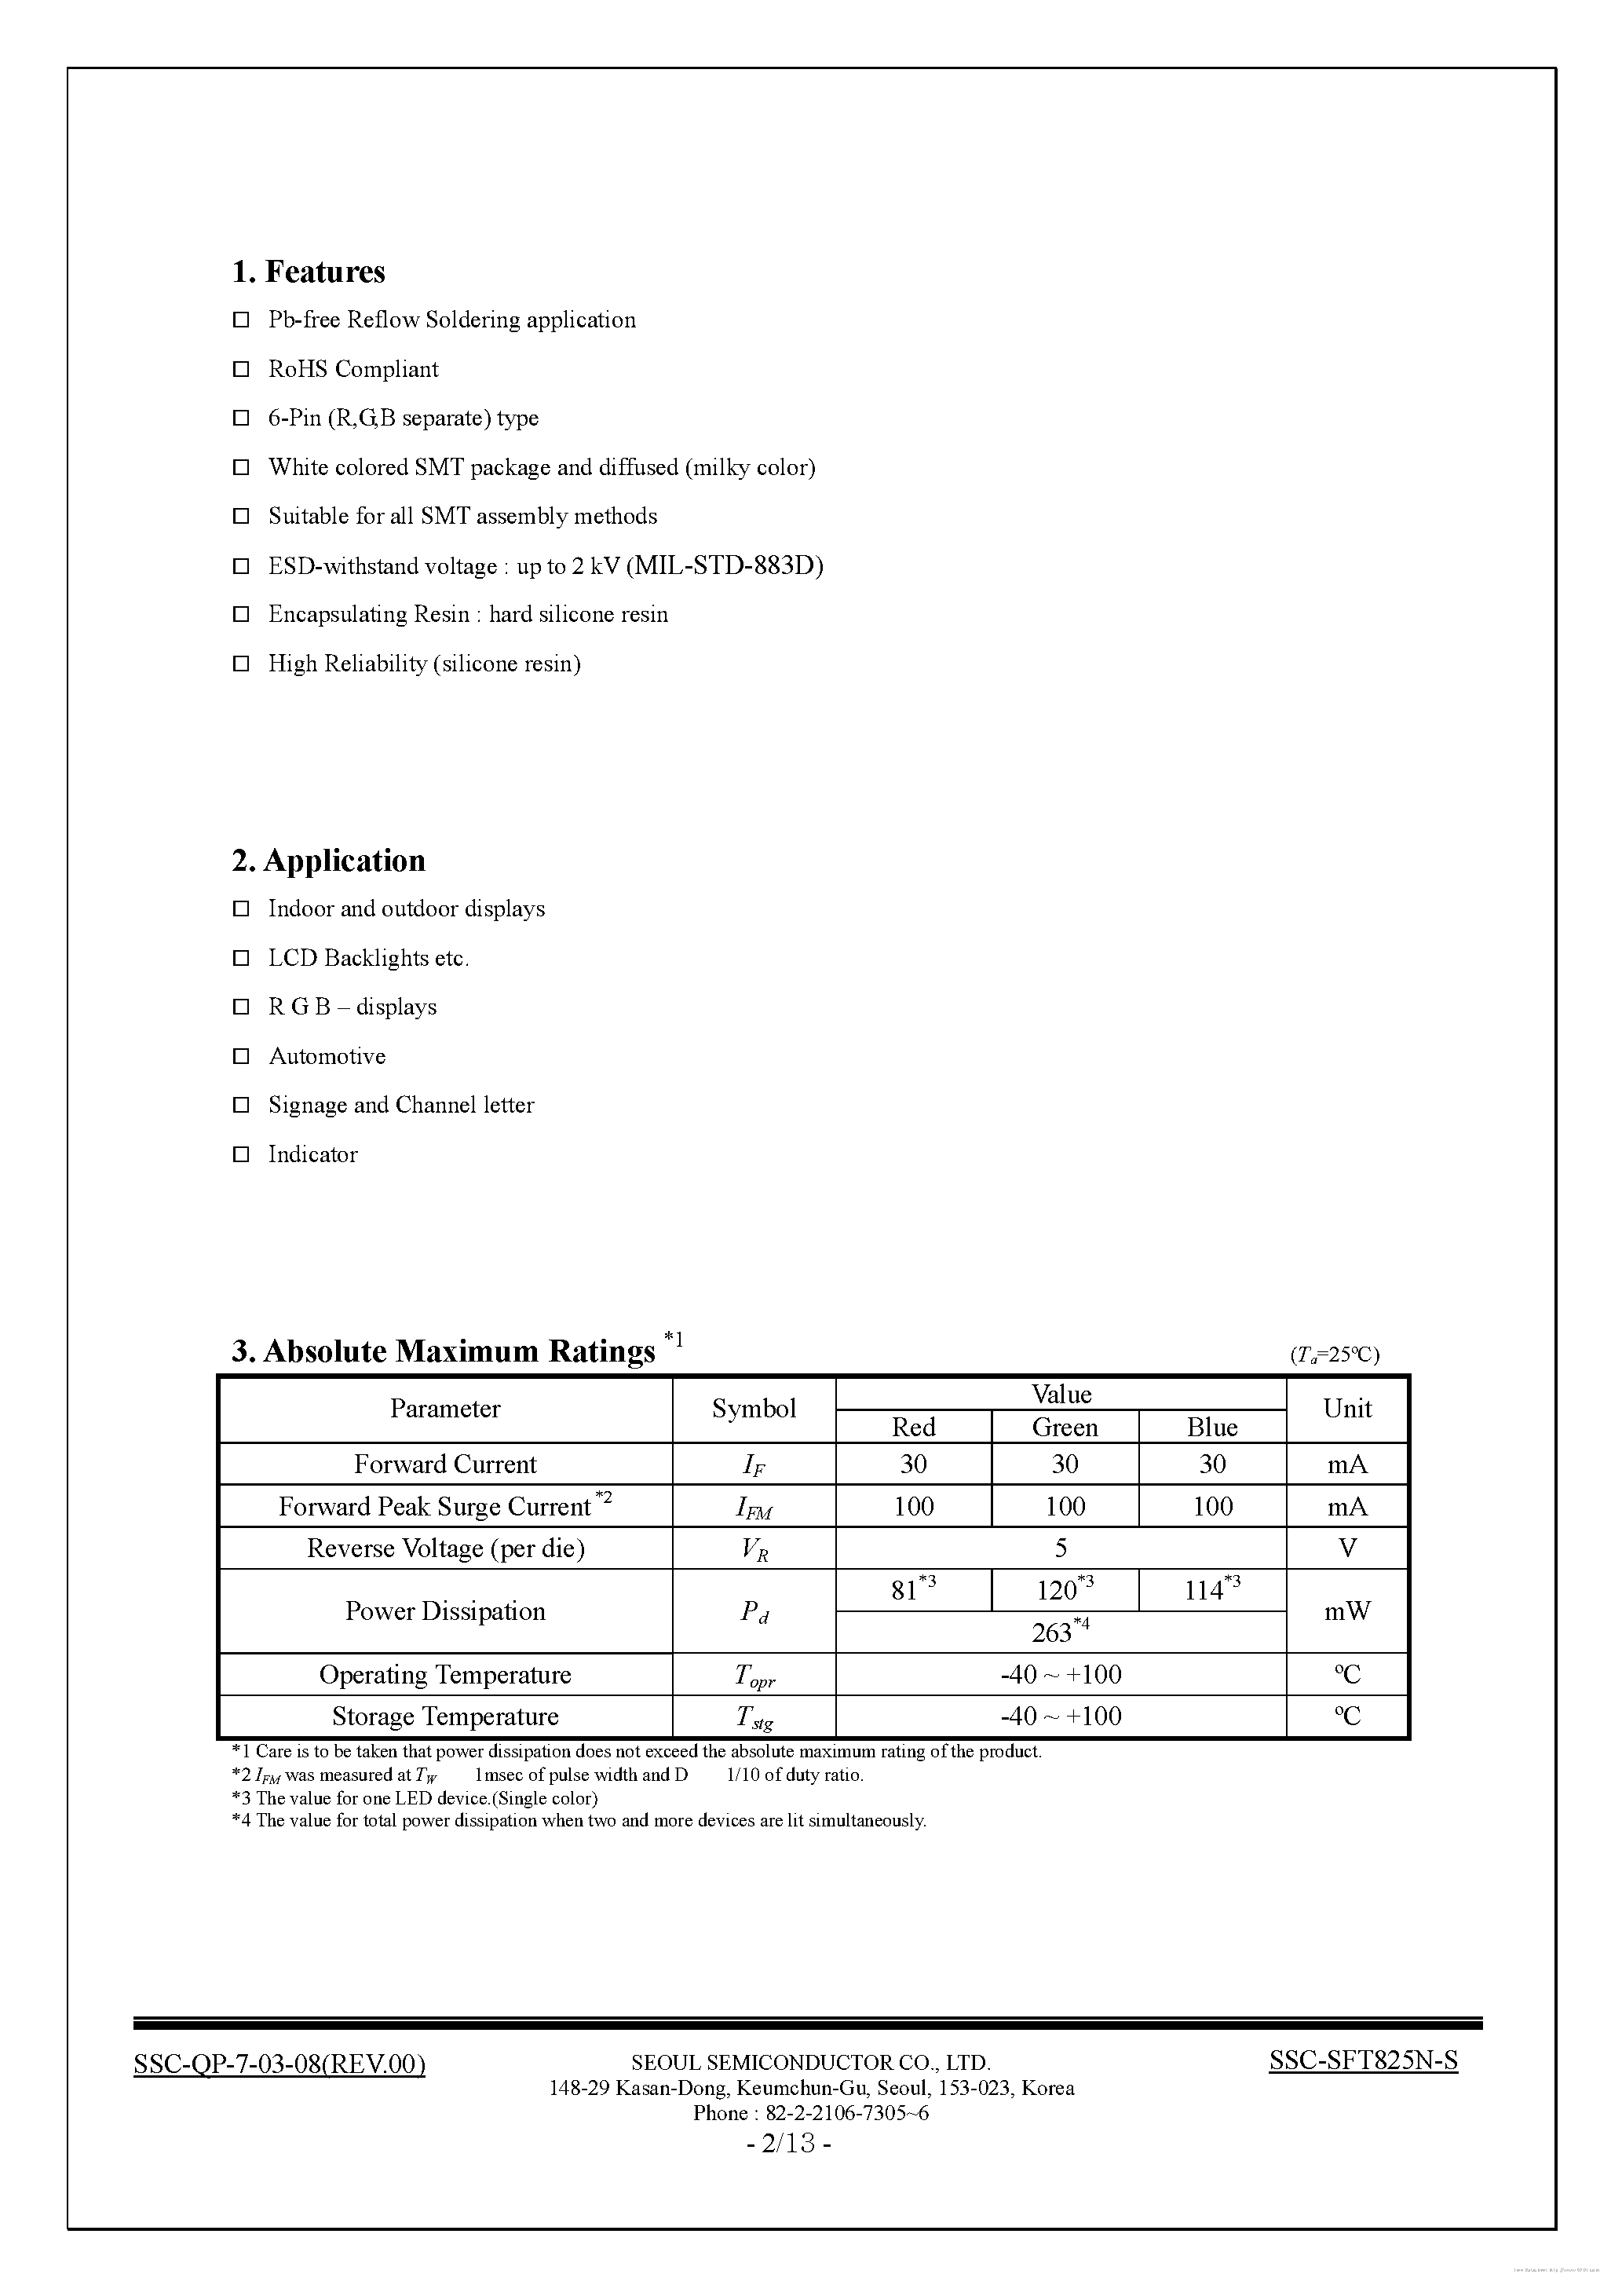 Datasheet SSC-SFT825N-S - page 2